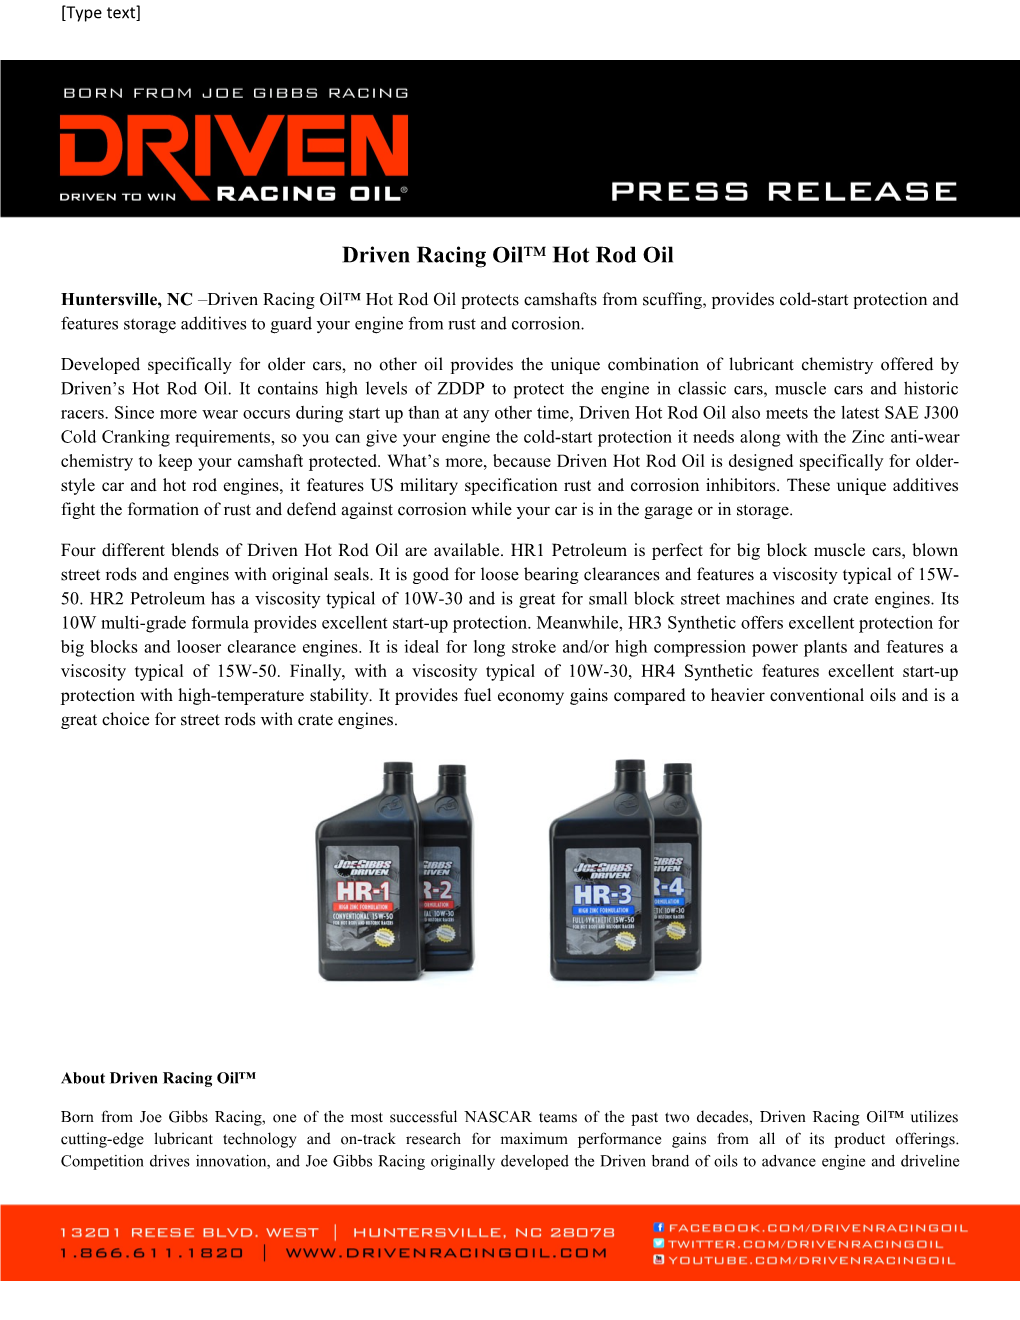 Driven Racing Oil Hot Rod Oil